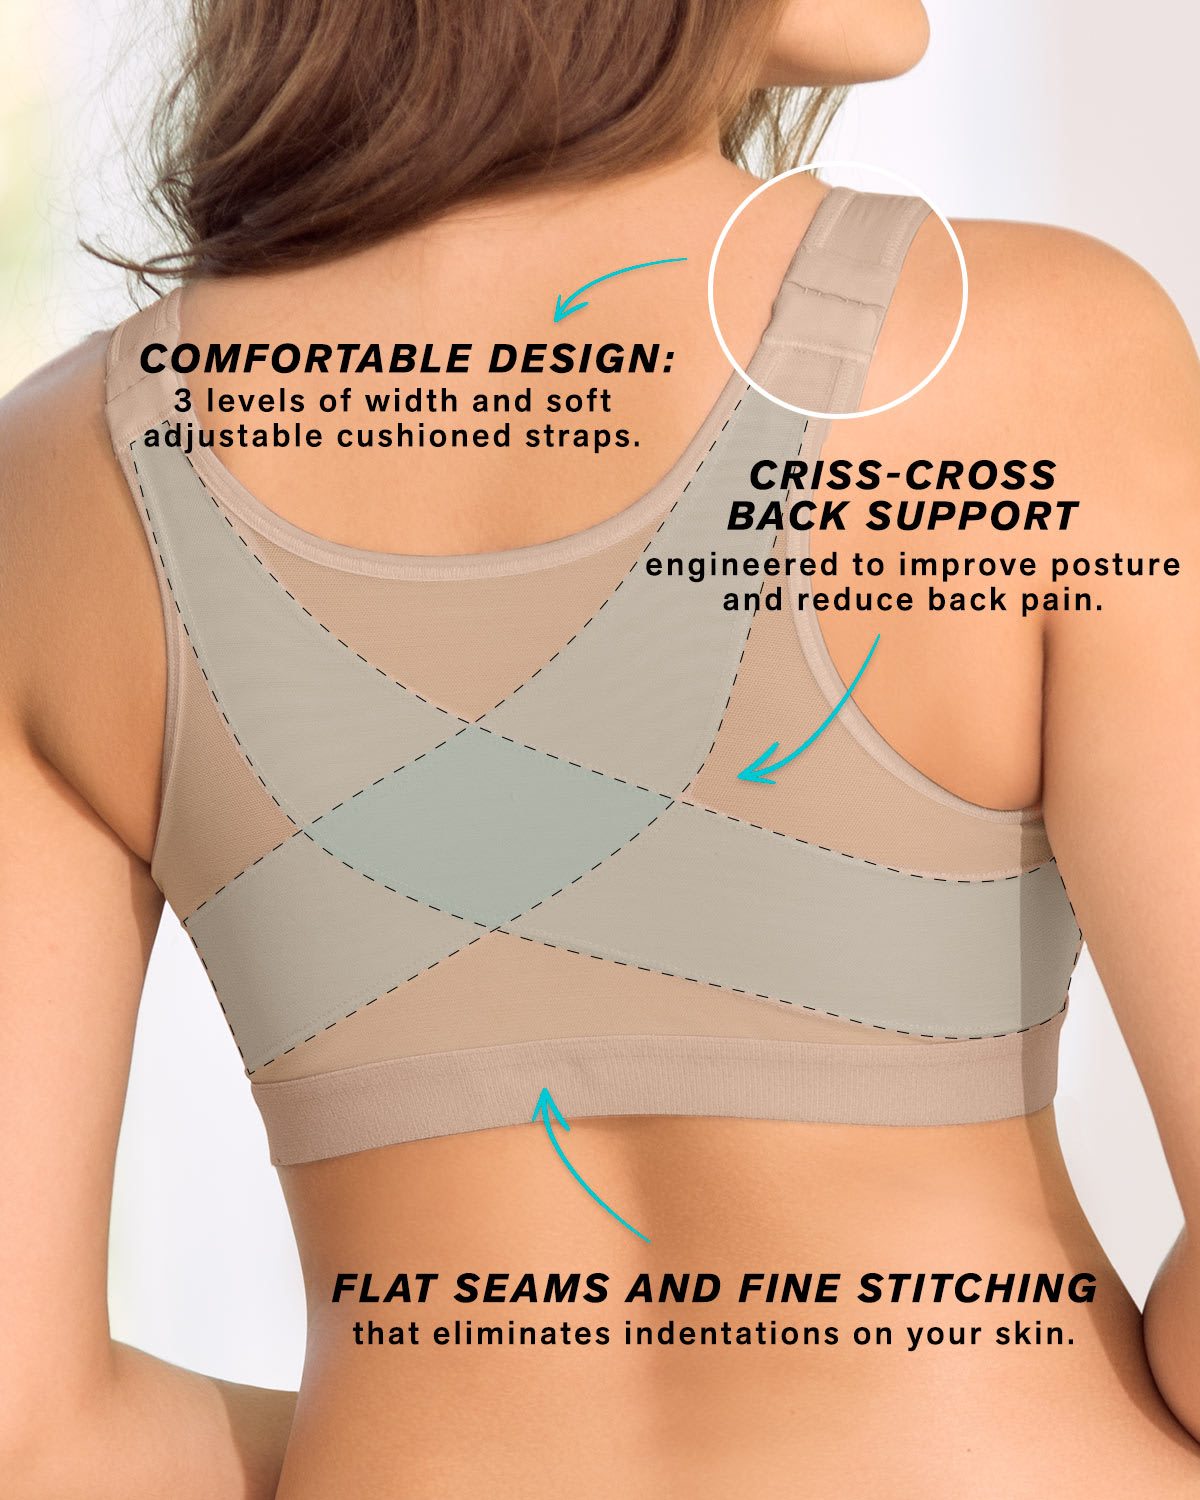 10 Best Back Support Bras for Posture and Help With Back and